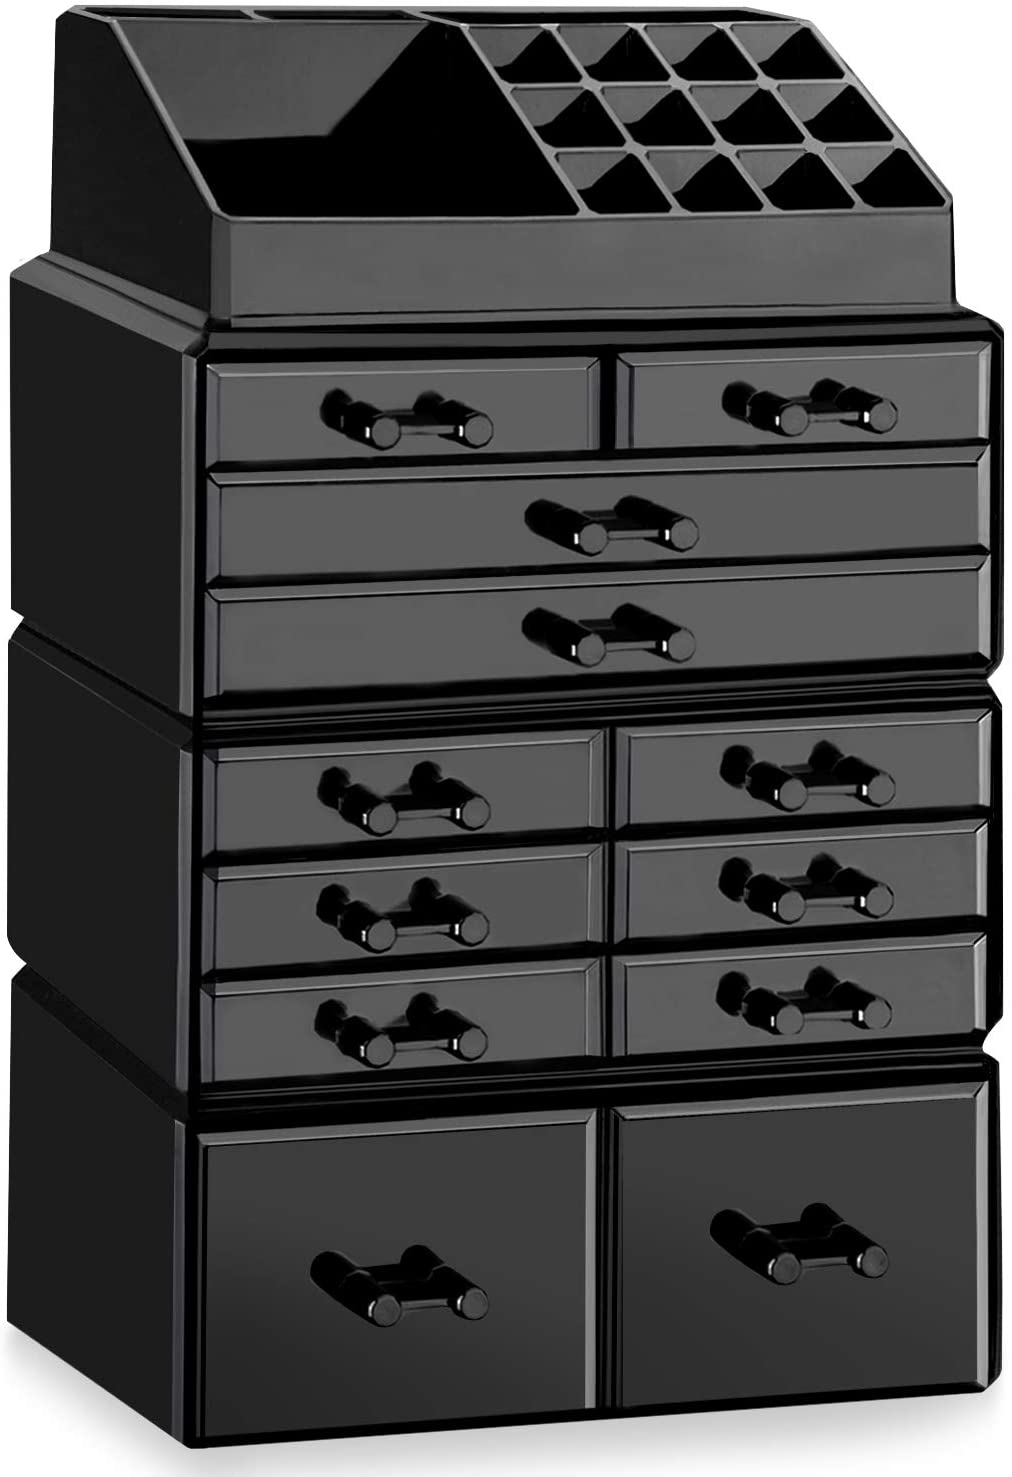 HBlife Makeup Organizer Acrylic Cosmetic Storage Drawers and Jewelry Display Box with 12 Drawers, 9.5" x 5.4" x 15.8", Black